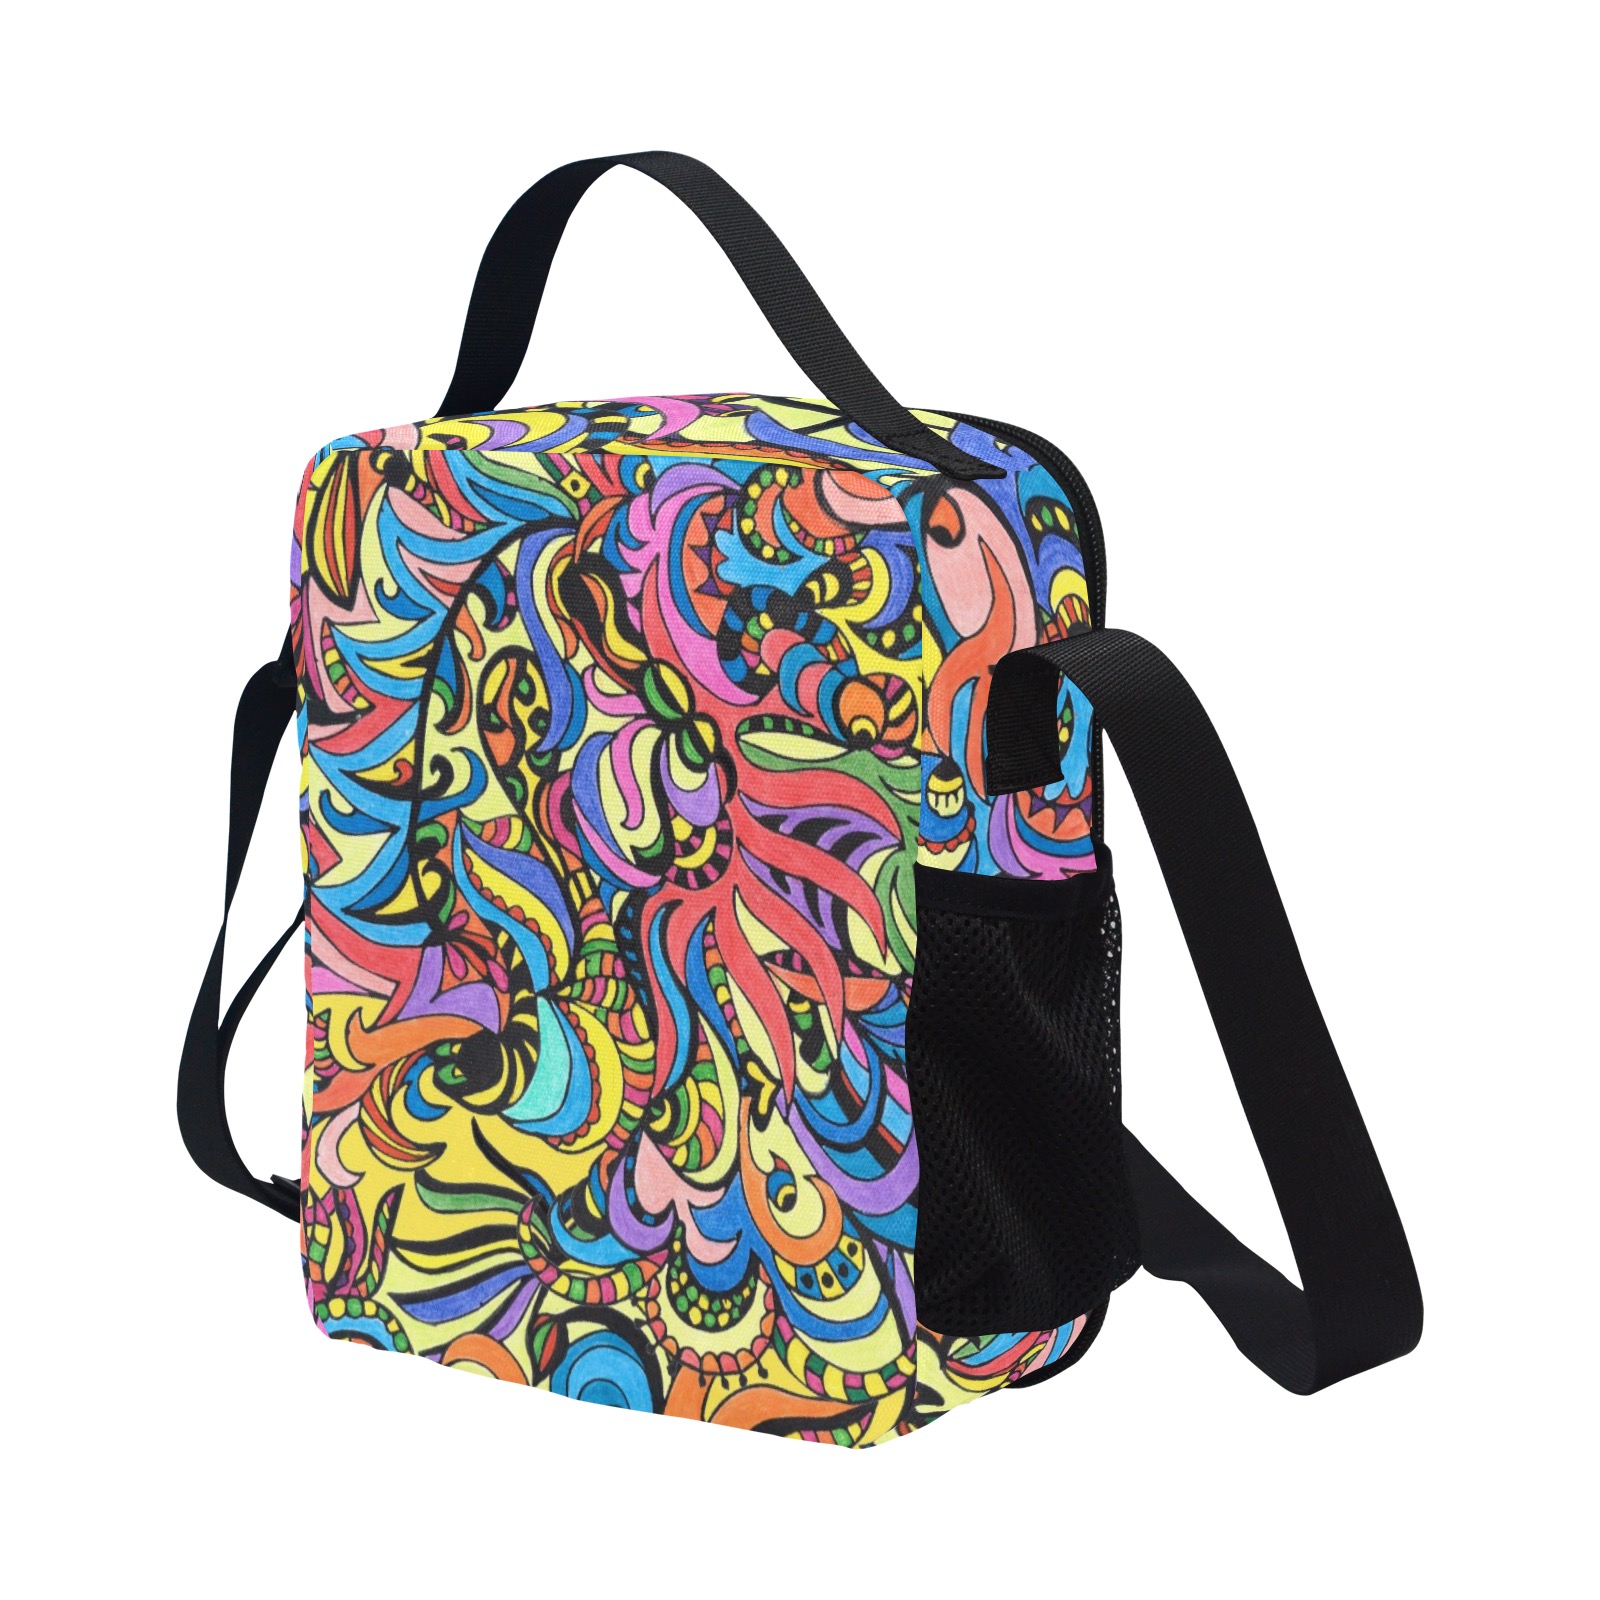 Mariana Trench All Over Print Crossbody Lunch Bag for Kids (Model 1722)